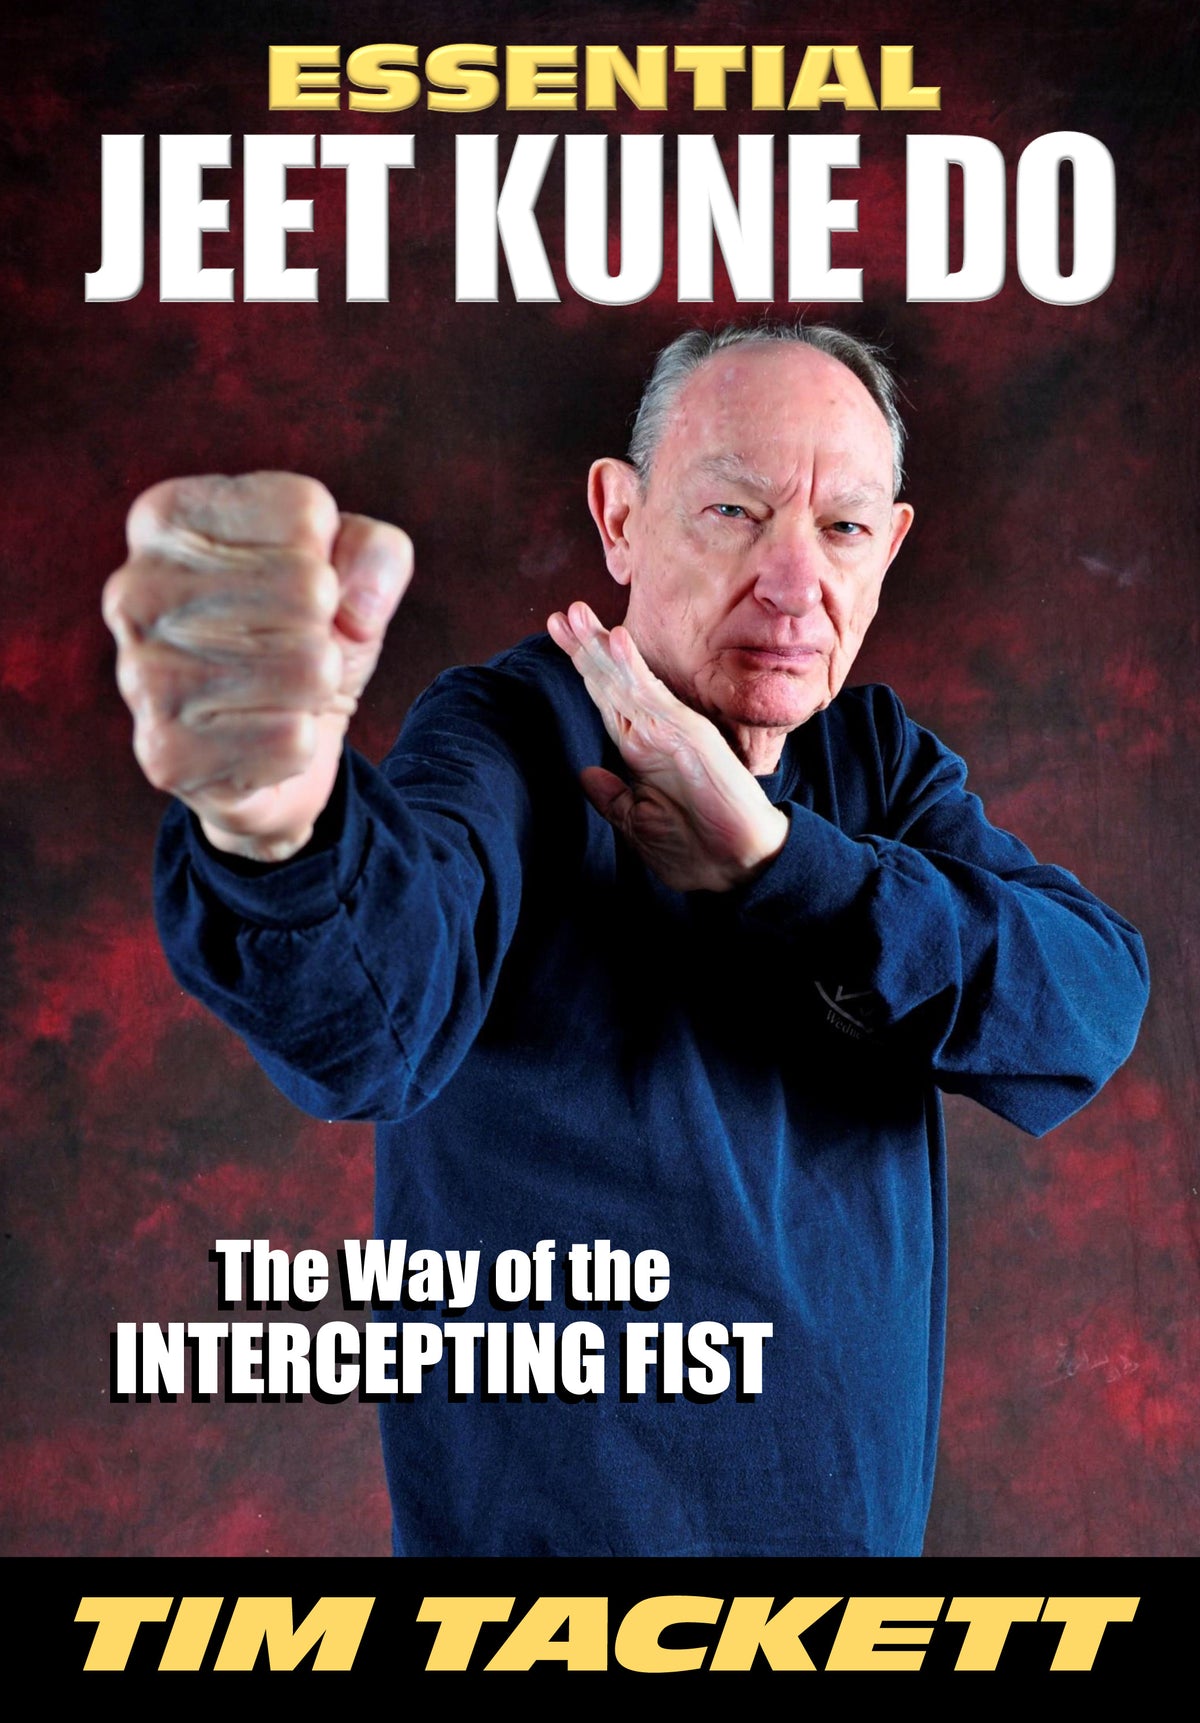 Essential Jeet Kune Do - Way of the Intercepting Fist Book by Tim Tackett